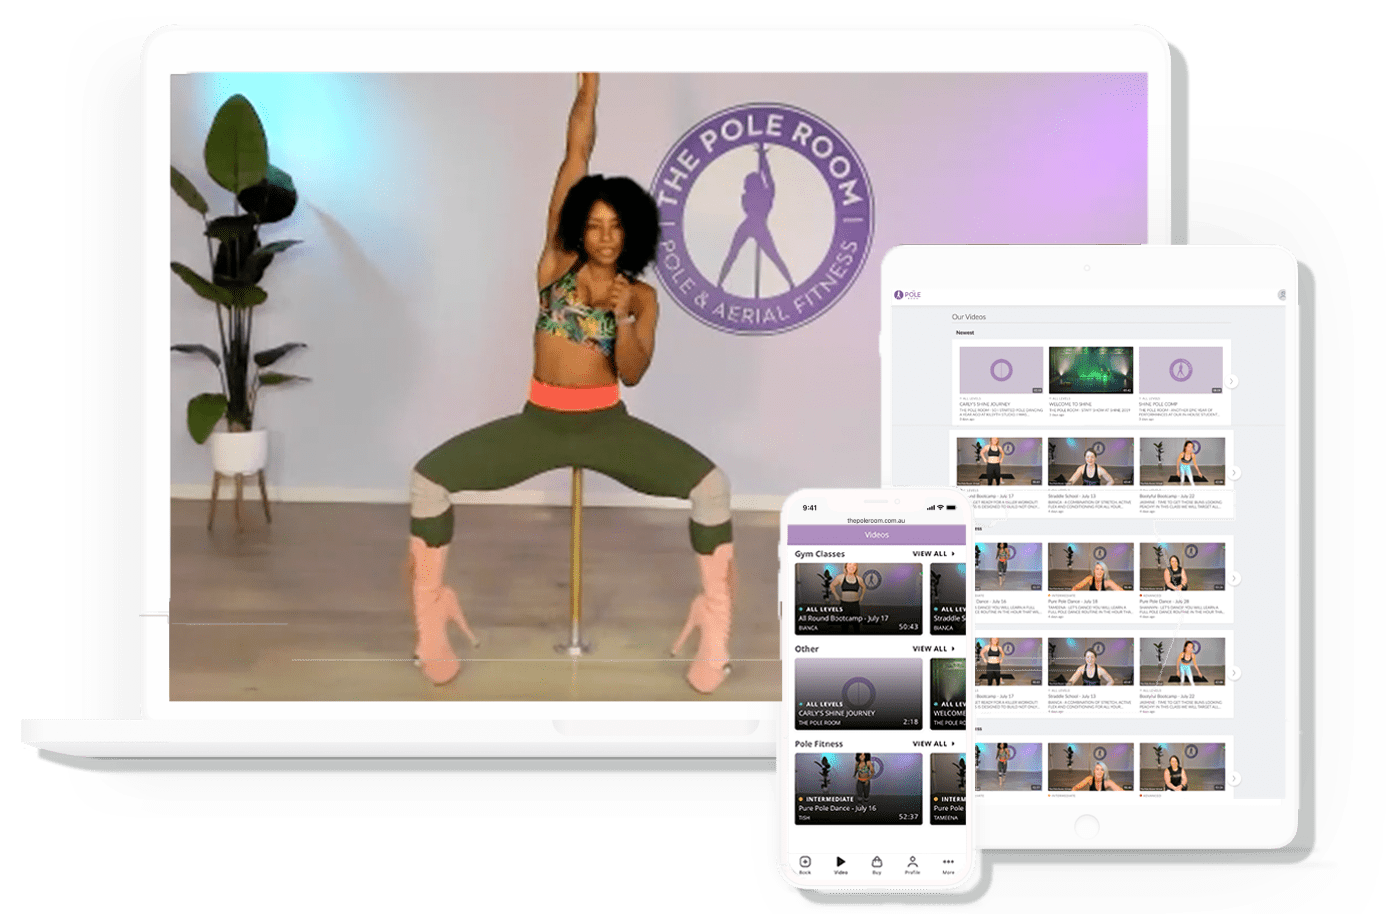 A POLE DANCE STUDIO IN YOUR POCKET (OR IN PERSON)